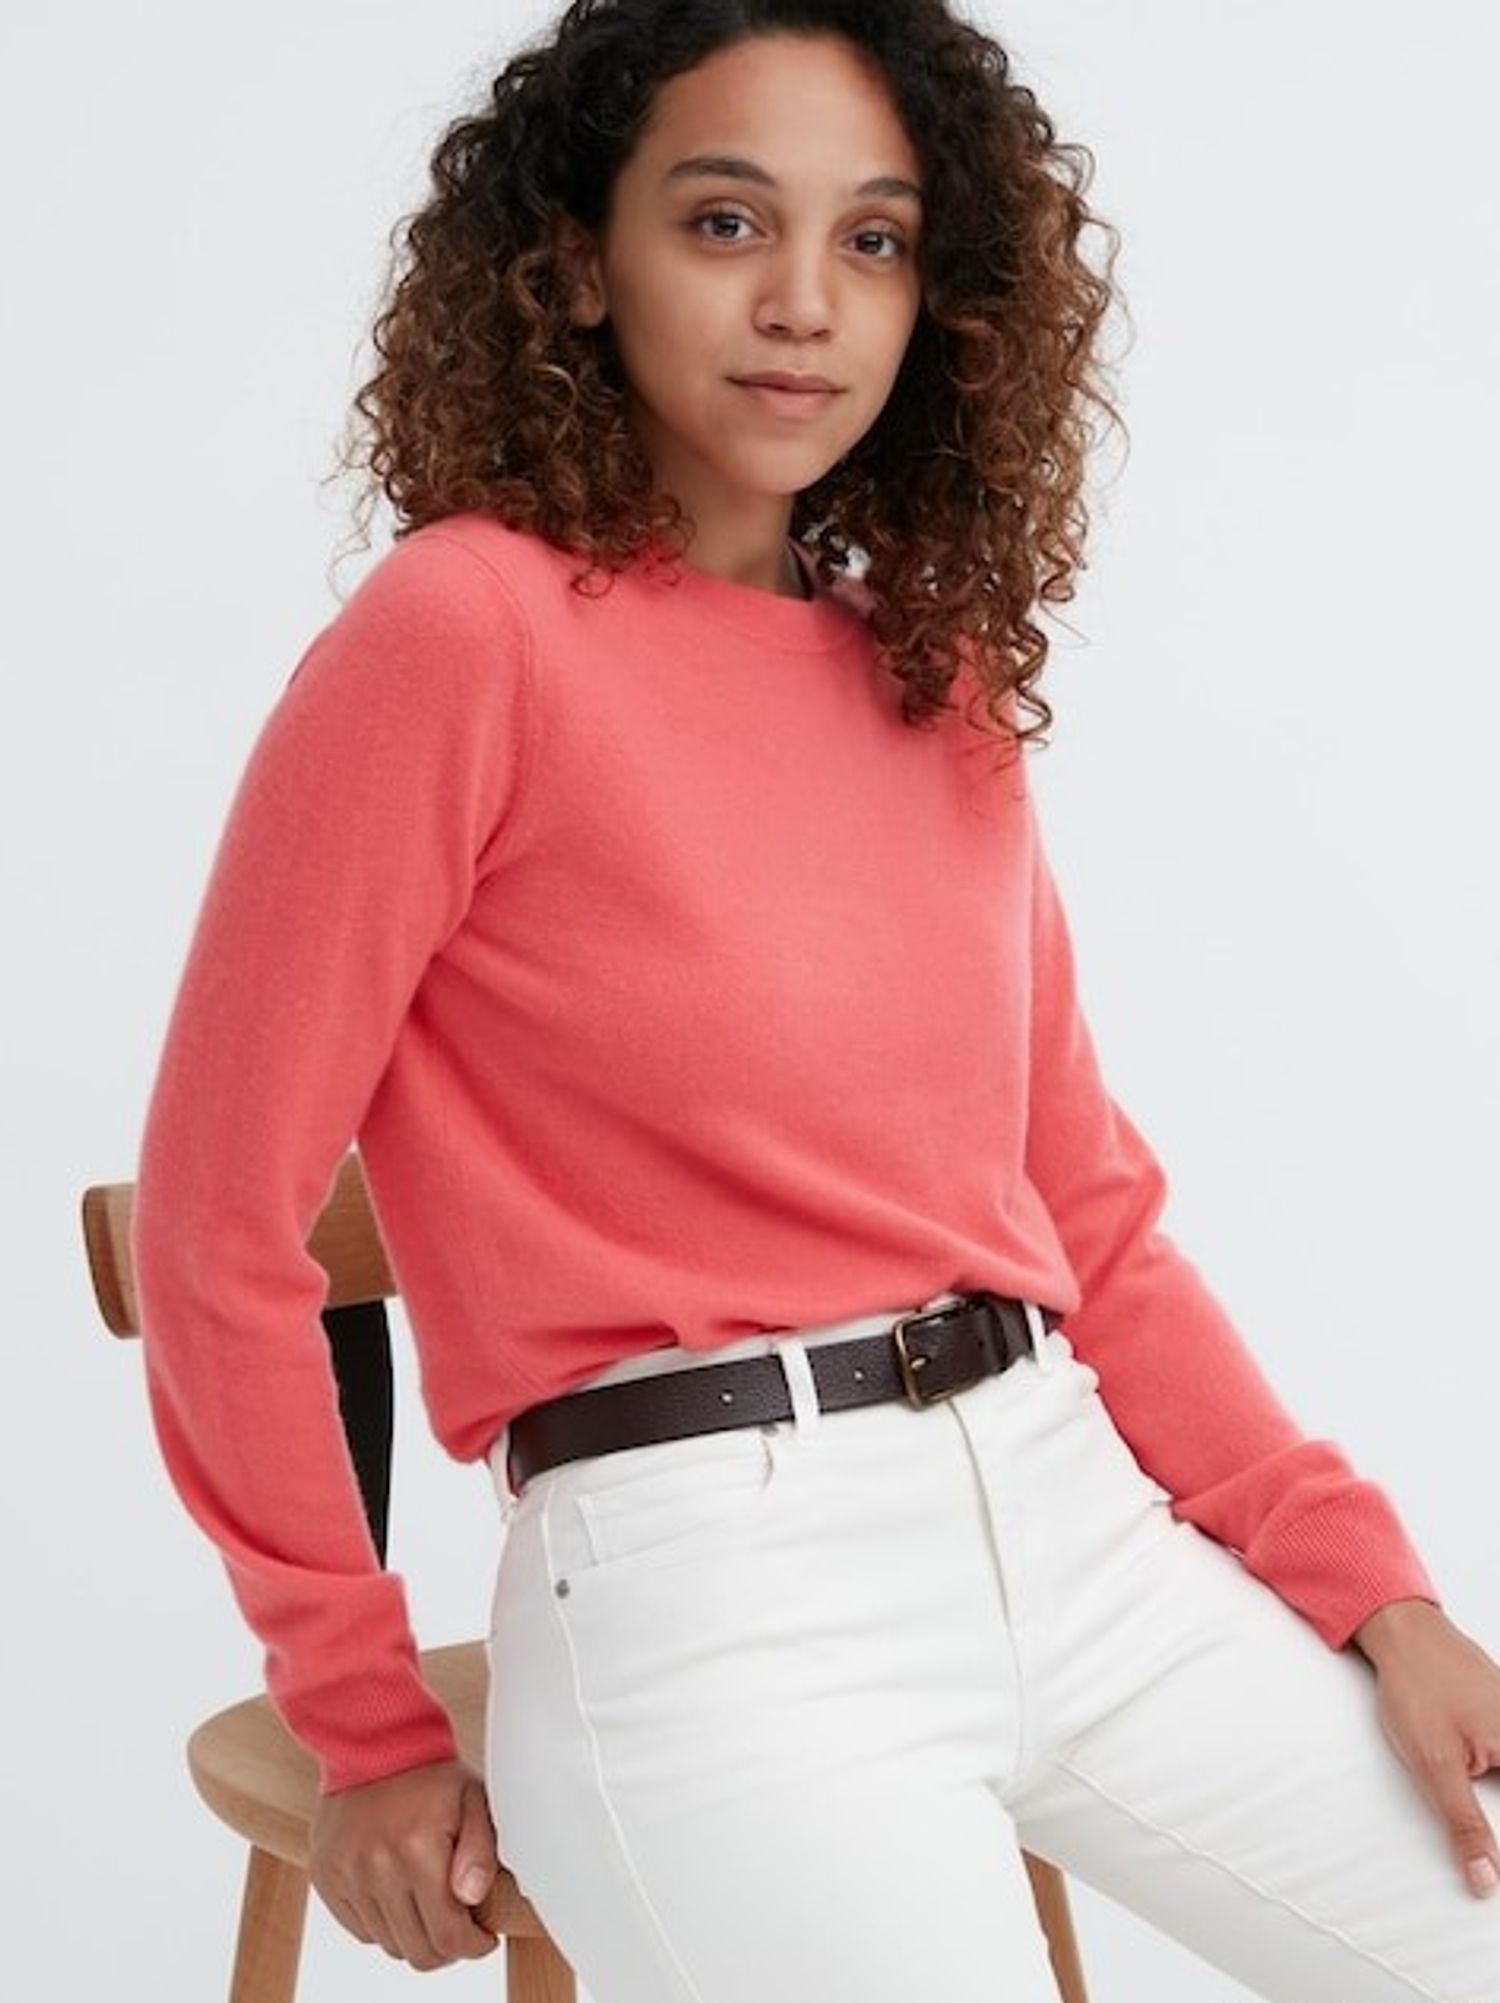 The Best Cashmere Sweaters For Keeping Warm - Brit + Co